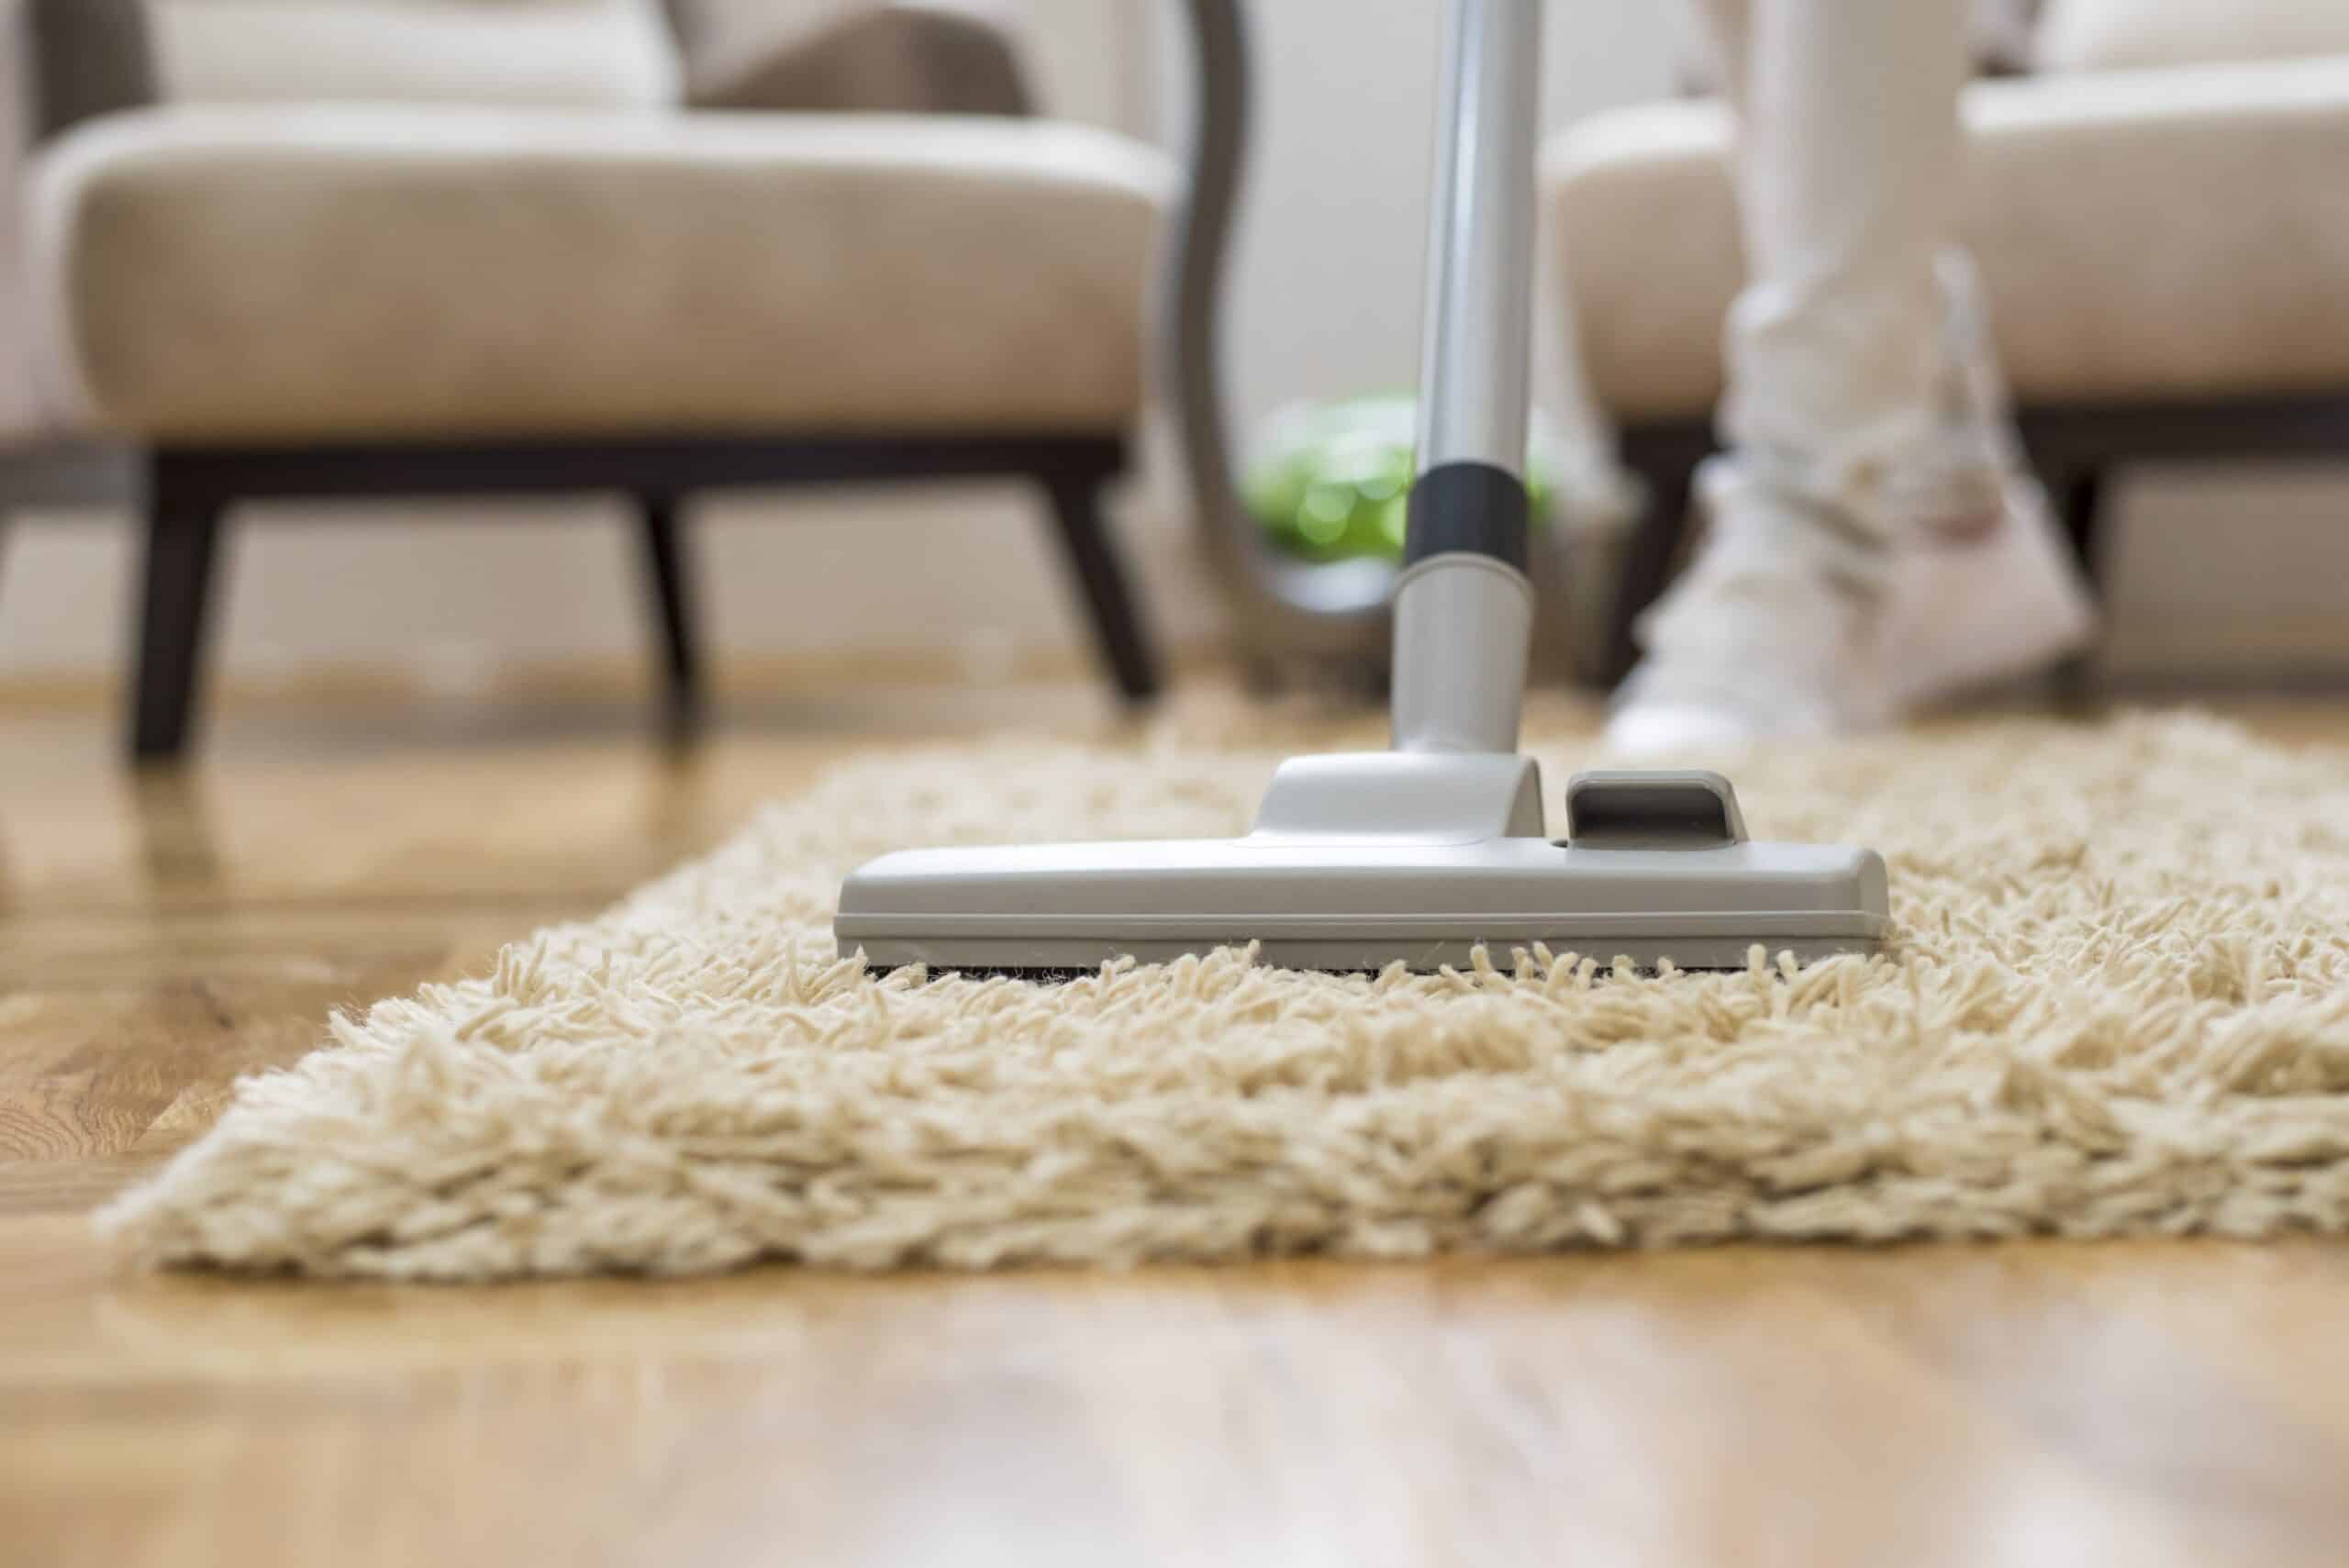 How can you extend carpet life?